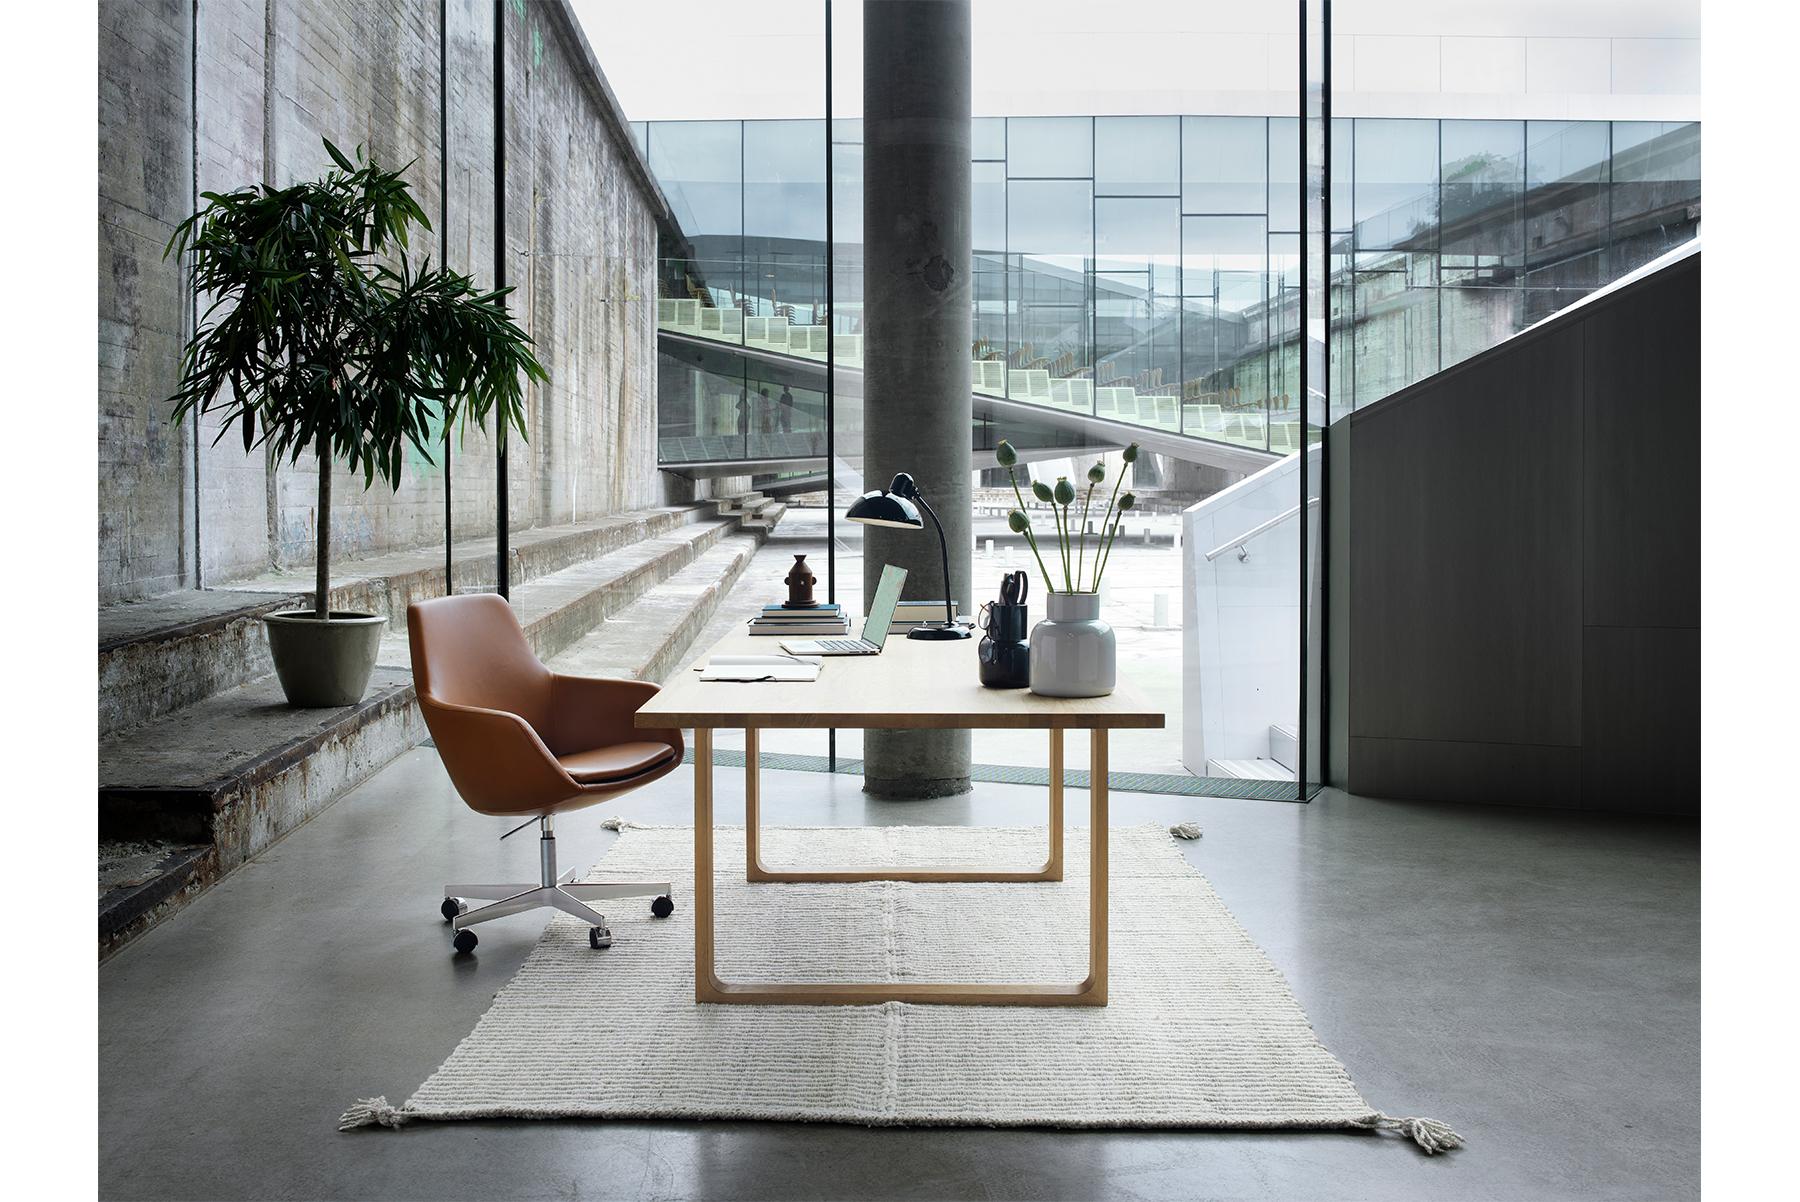 The Giraffe which earned its name because of its high backrest, dates back to 1959. Arne Jacobsen is the designer behind this beauty, and it was part of his total design of SAS Royal Hotel in Copenhagen. Jacobsen played around with the Giraffe and